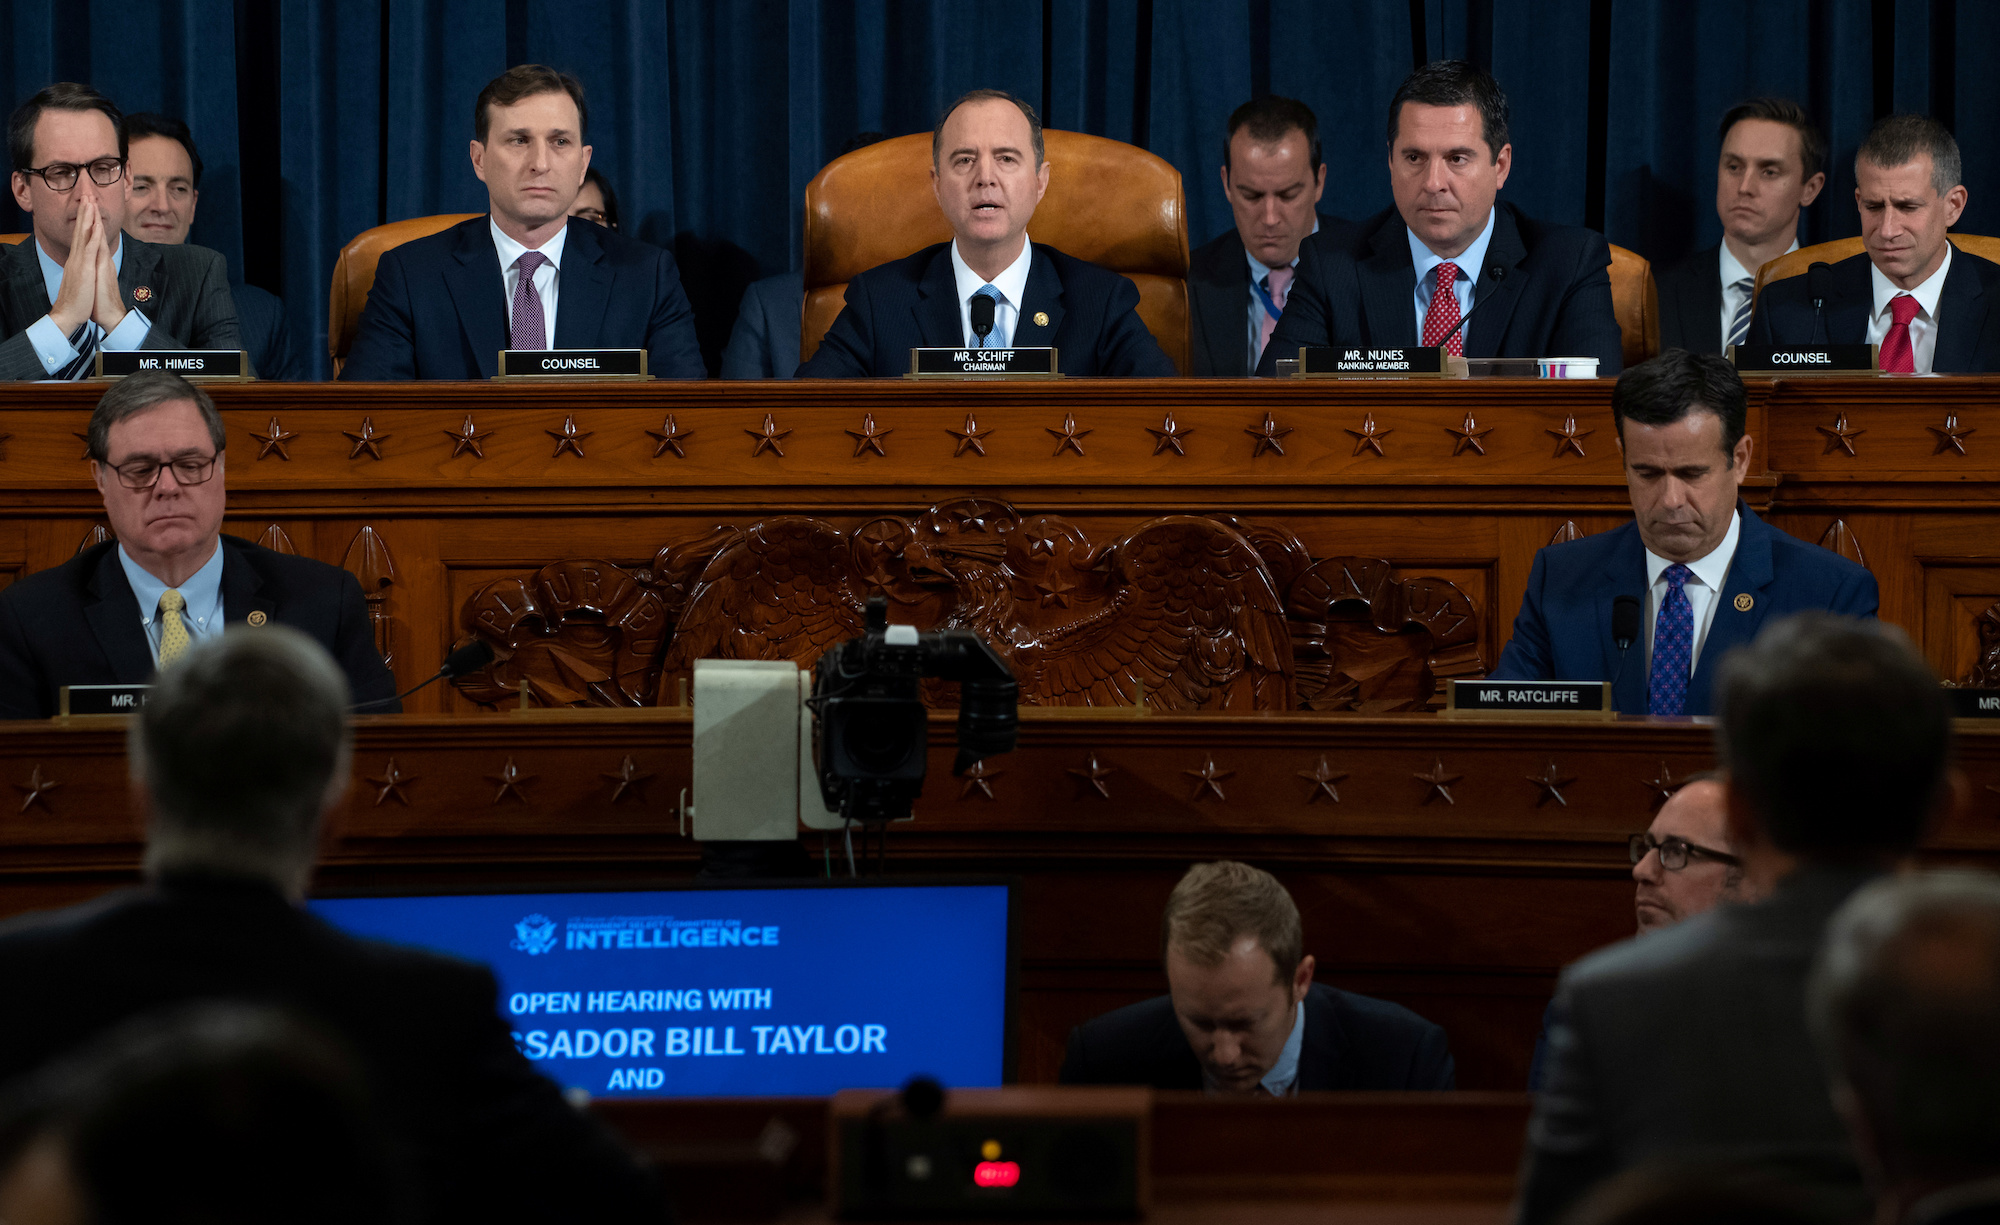 Fox News and CNN covered the impeachment hearings very differently. Here are some of the biggest divergences. - Business Insider